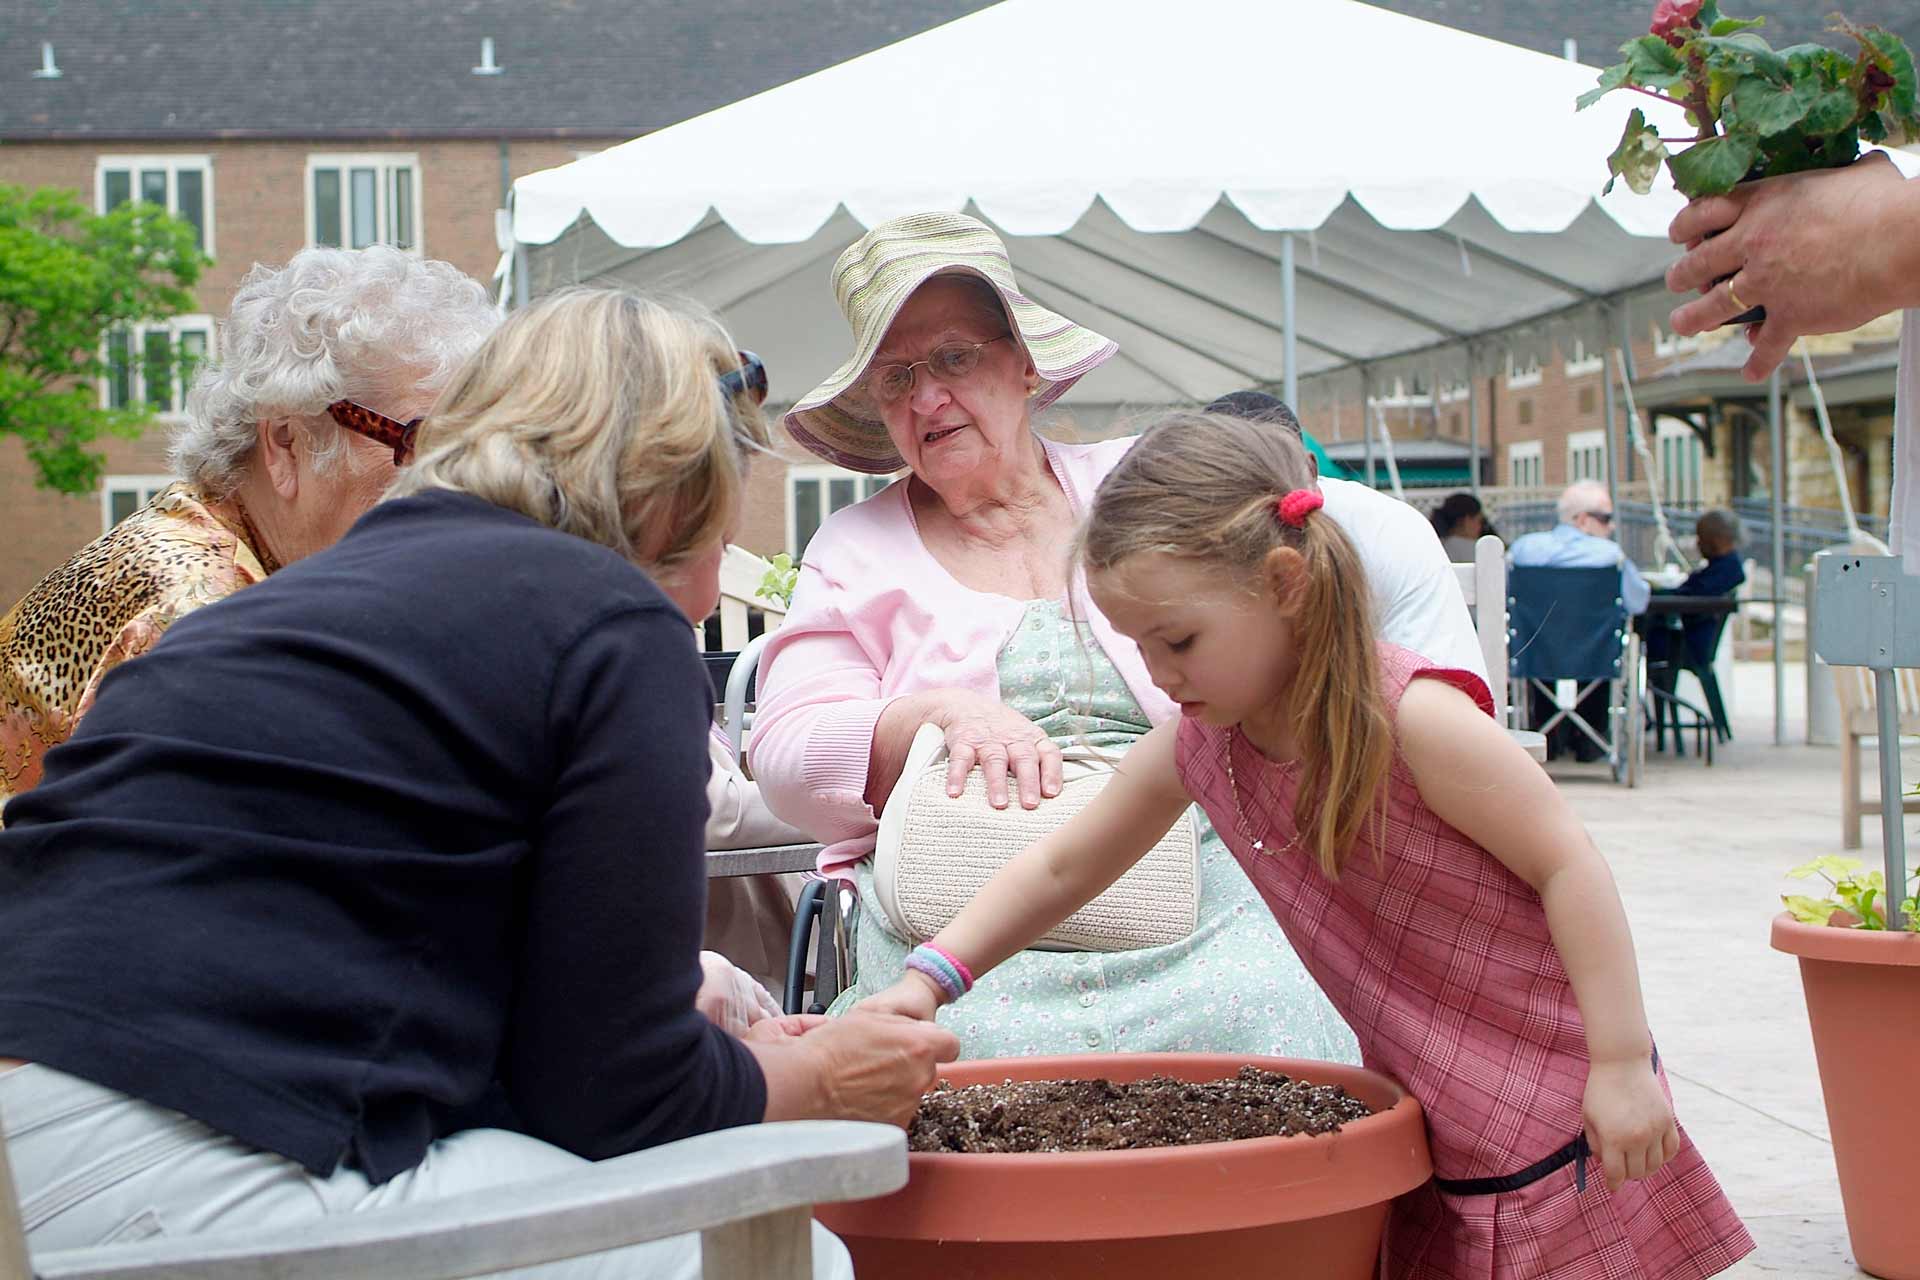 A photo of residents and a child planting flowers in pots outside The McGregor.